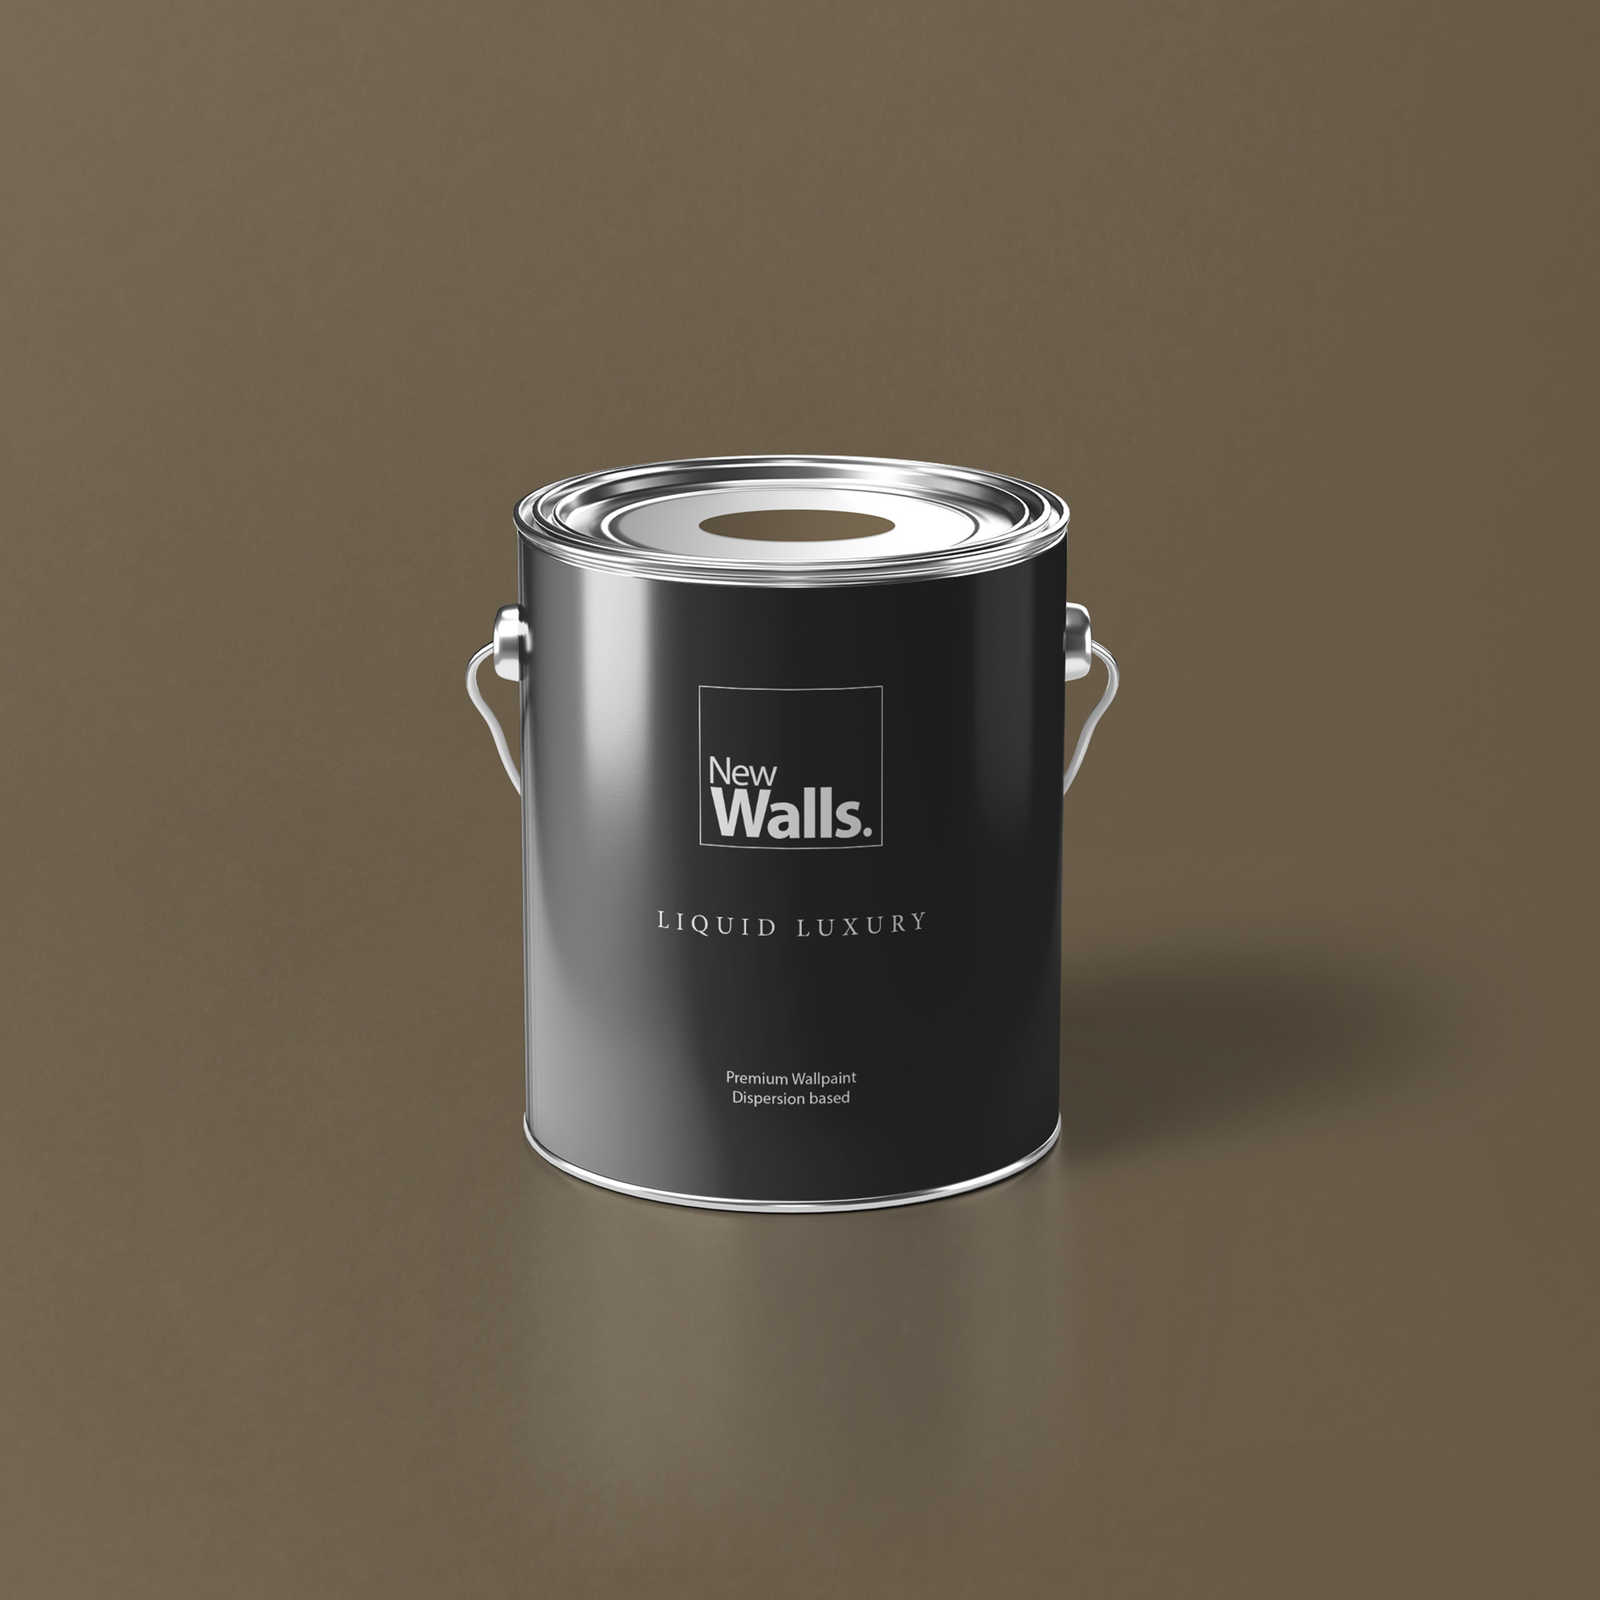 Premium Wall Paint Strong Khaki »Essential Earth« NW713 – 2.5 litre
